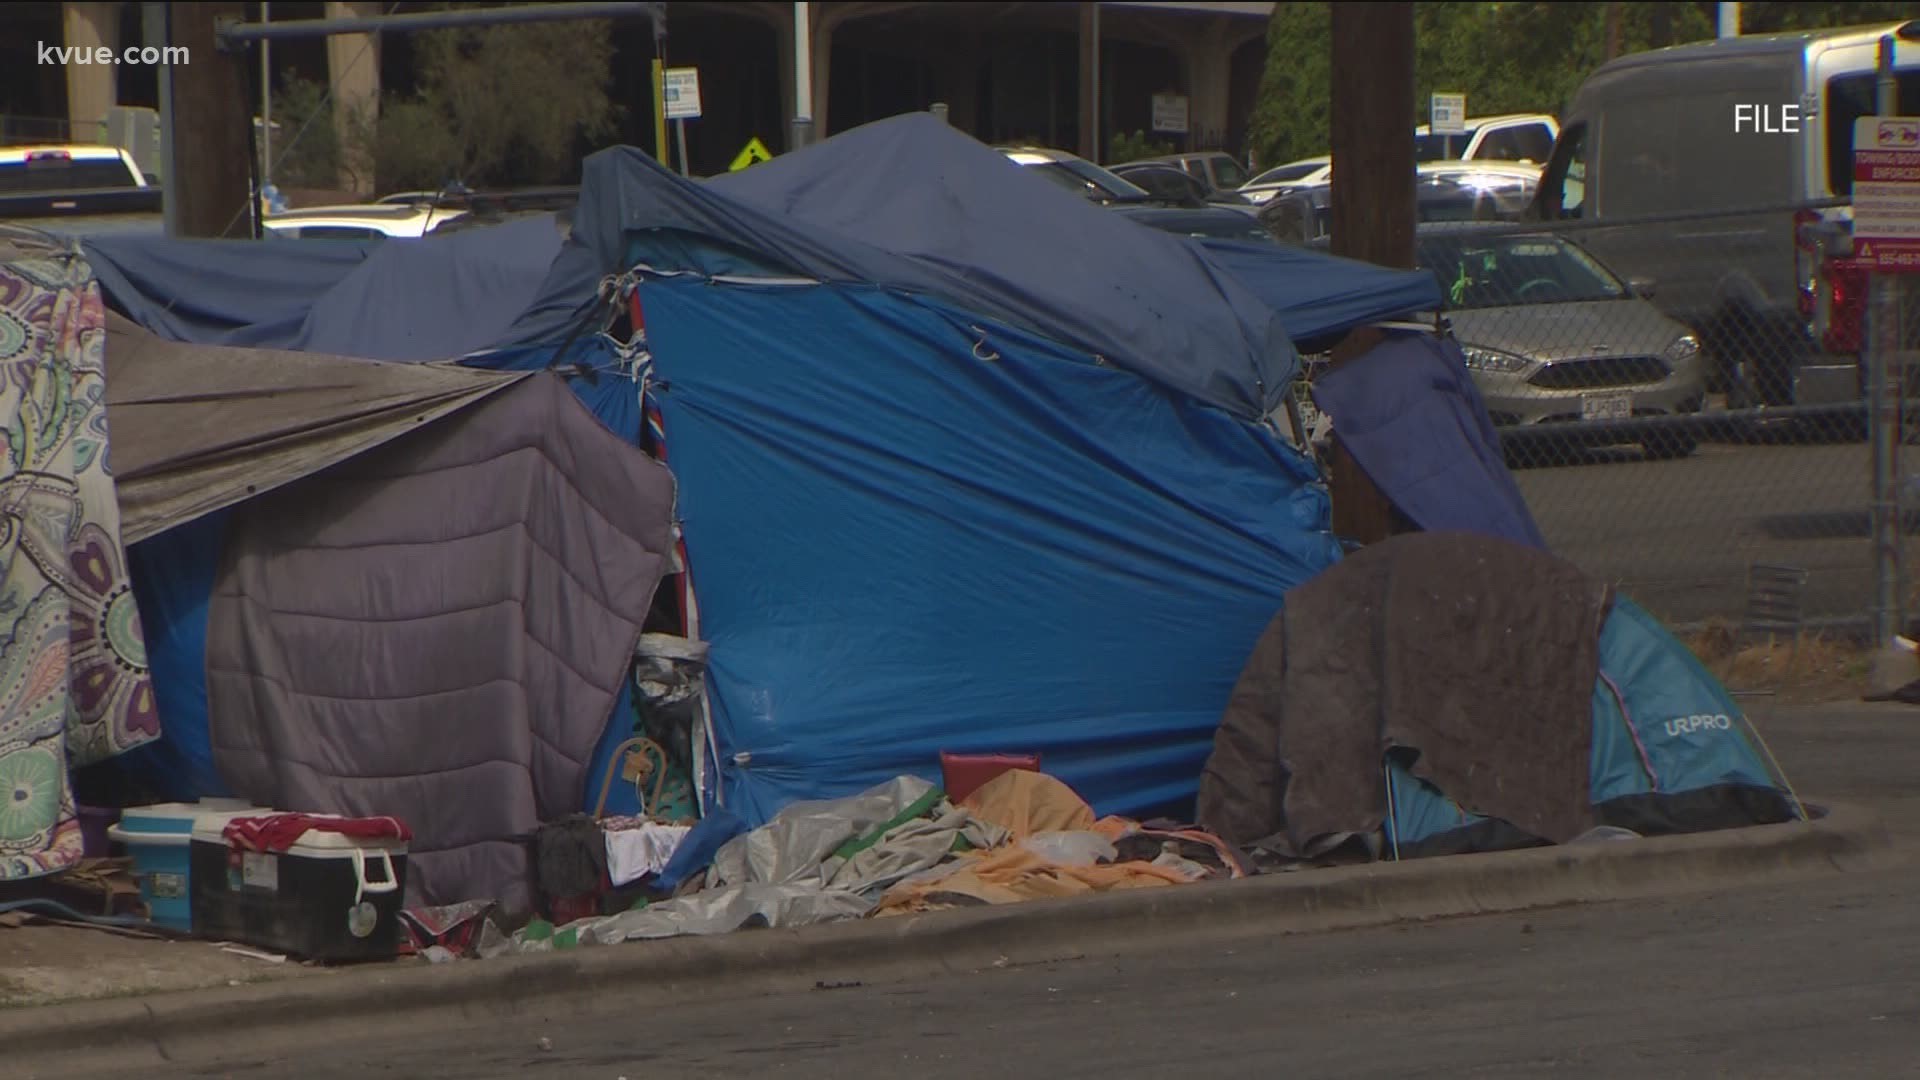 A measure to reinstate Austin's camping ban will not be on the November ballot.